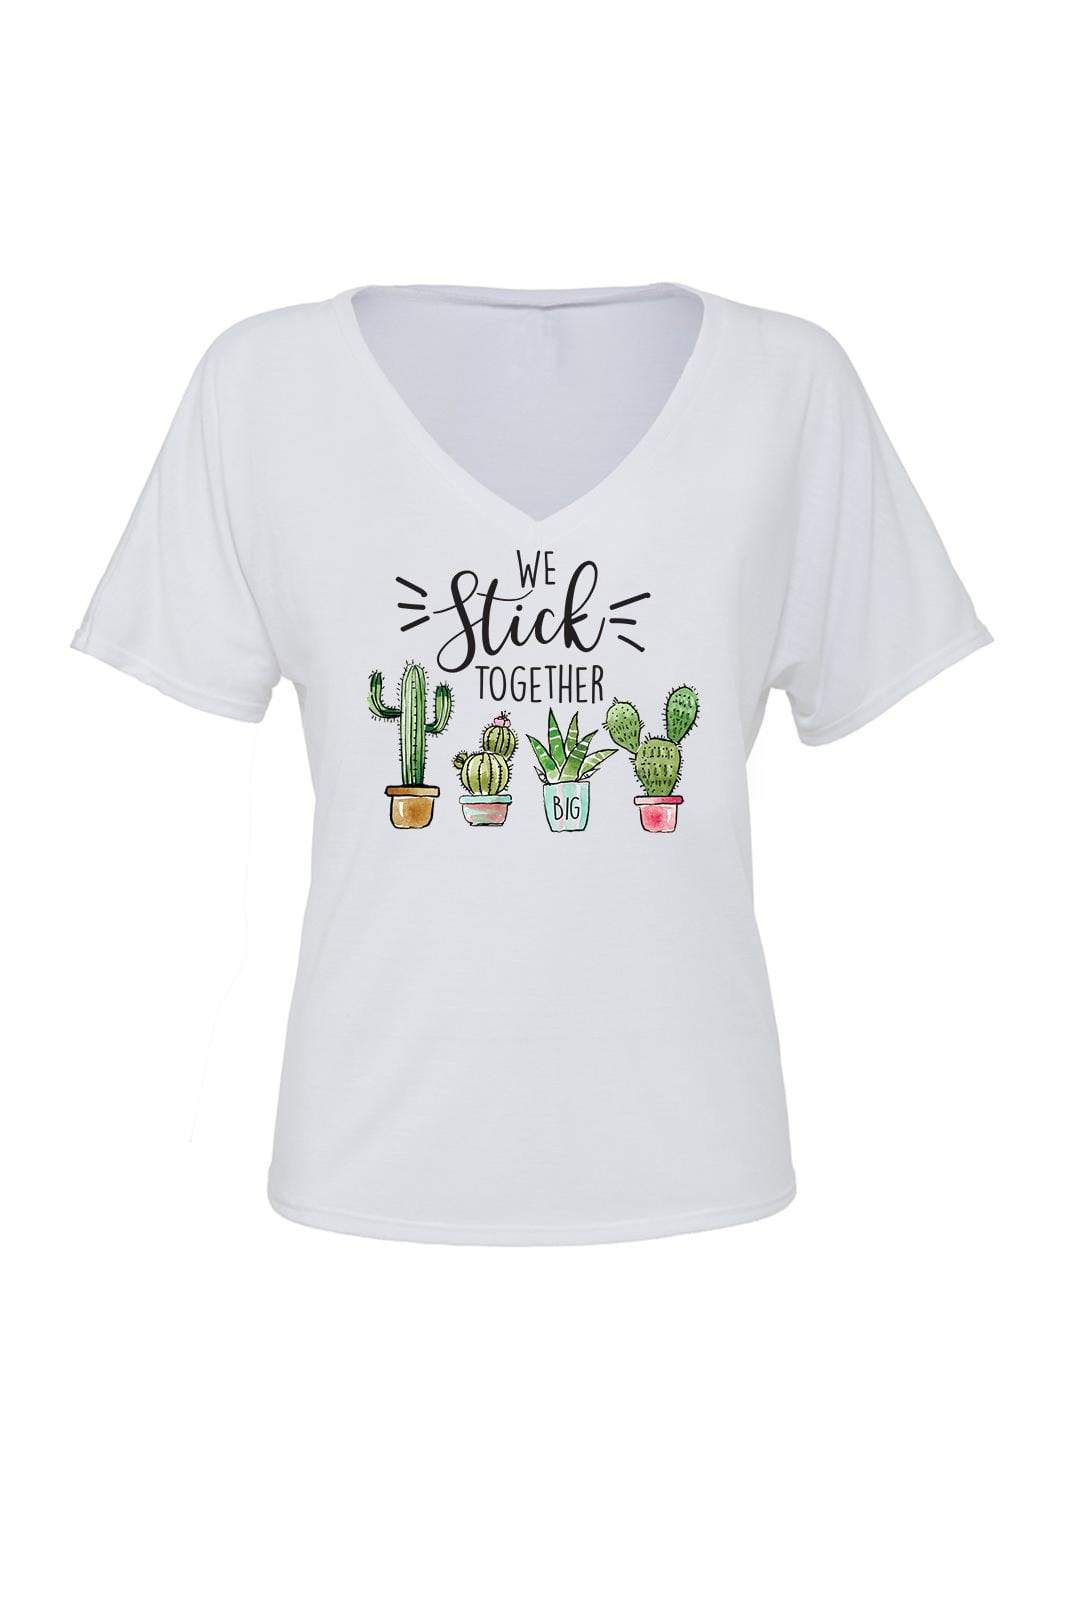 Big Little We Stick Together Shirt - Bella Slouchy V-Neck Short Sleeve, Ladies, Sunny and Southern, - Sunny and Southern,